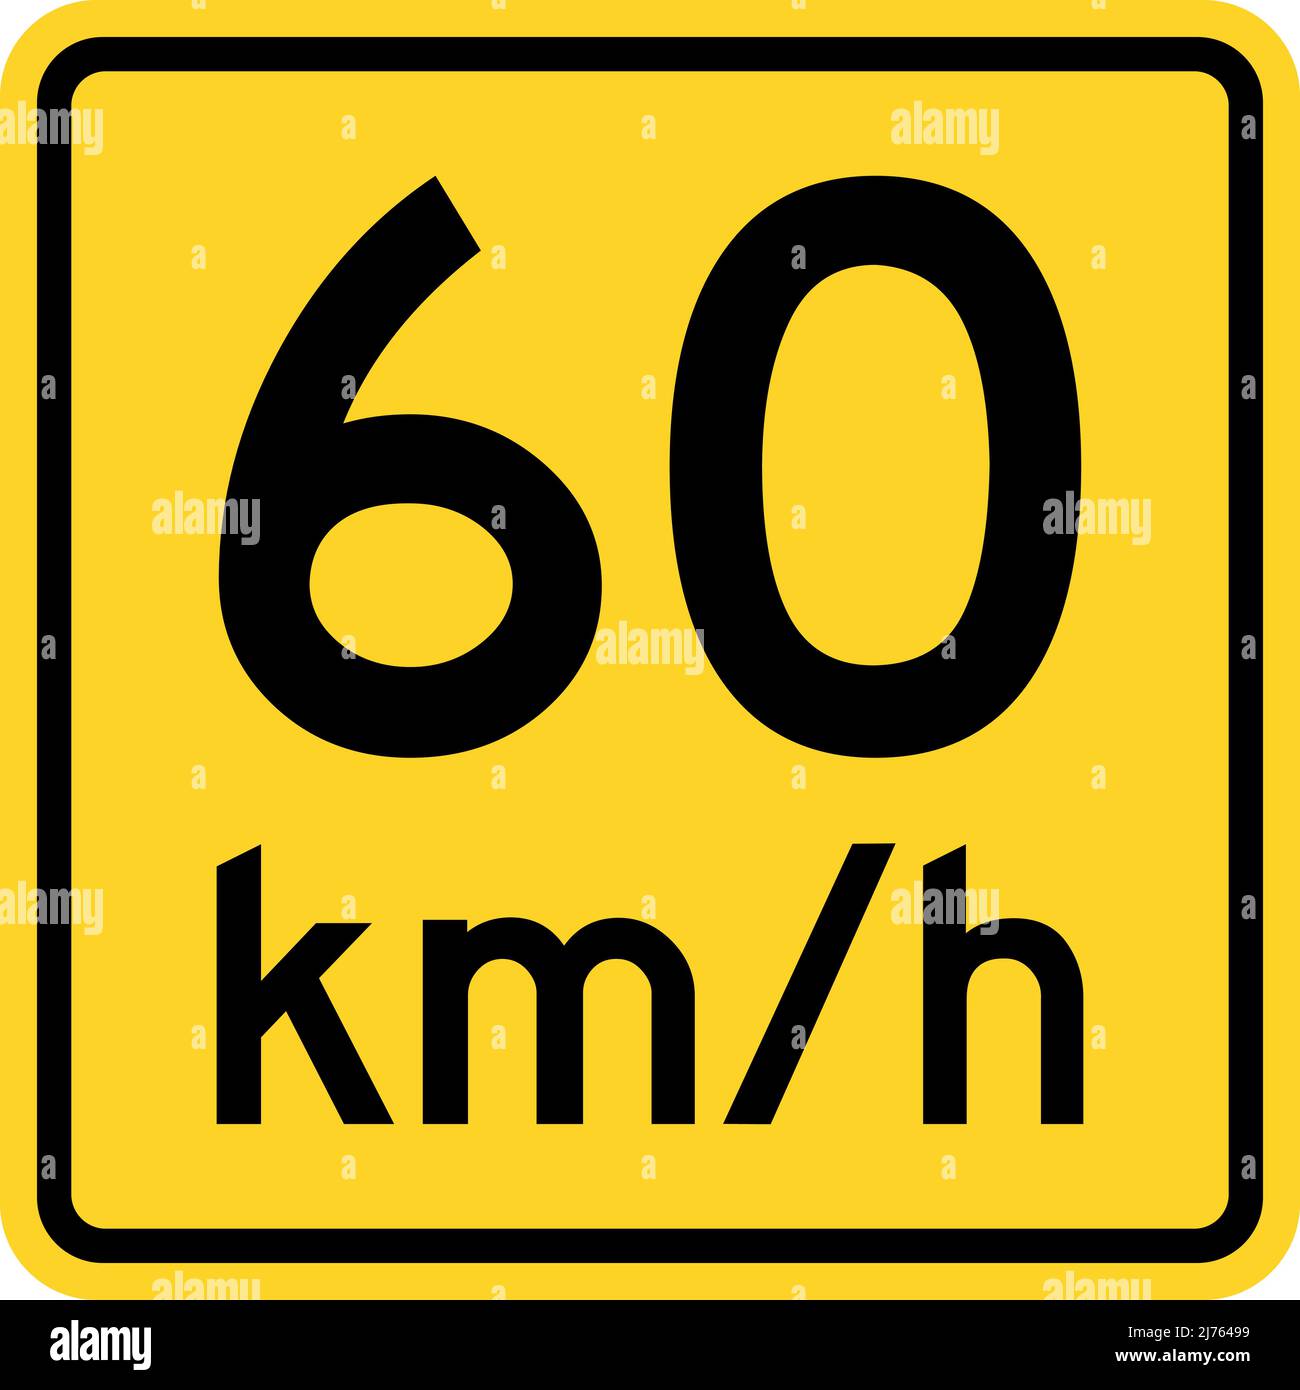 Advisory speed 60 km per hr sign. Traffic signs and symbols. Stock Vector